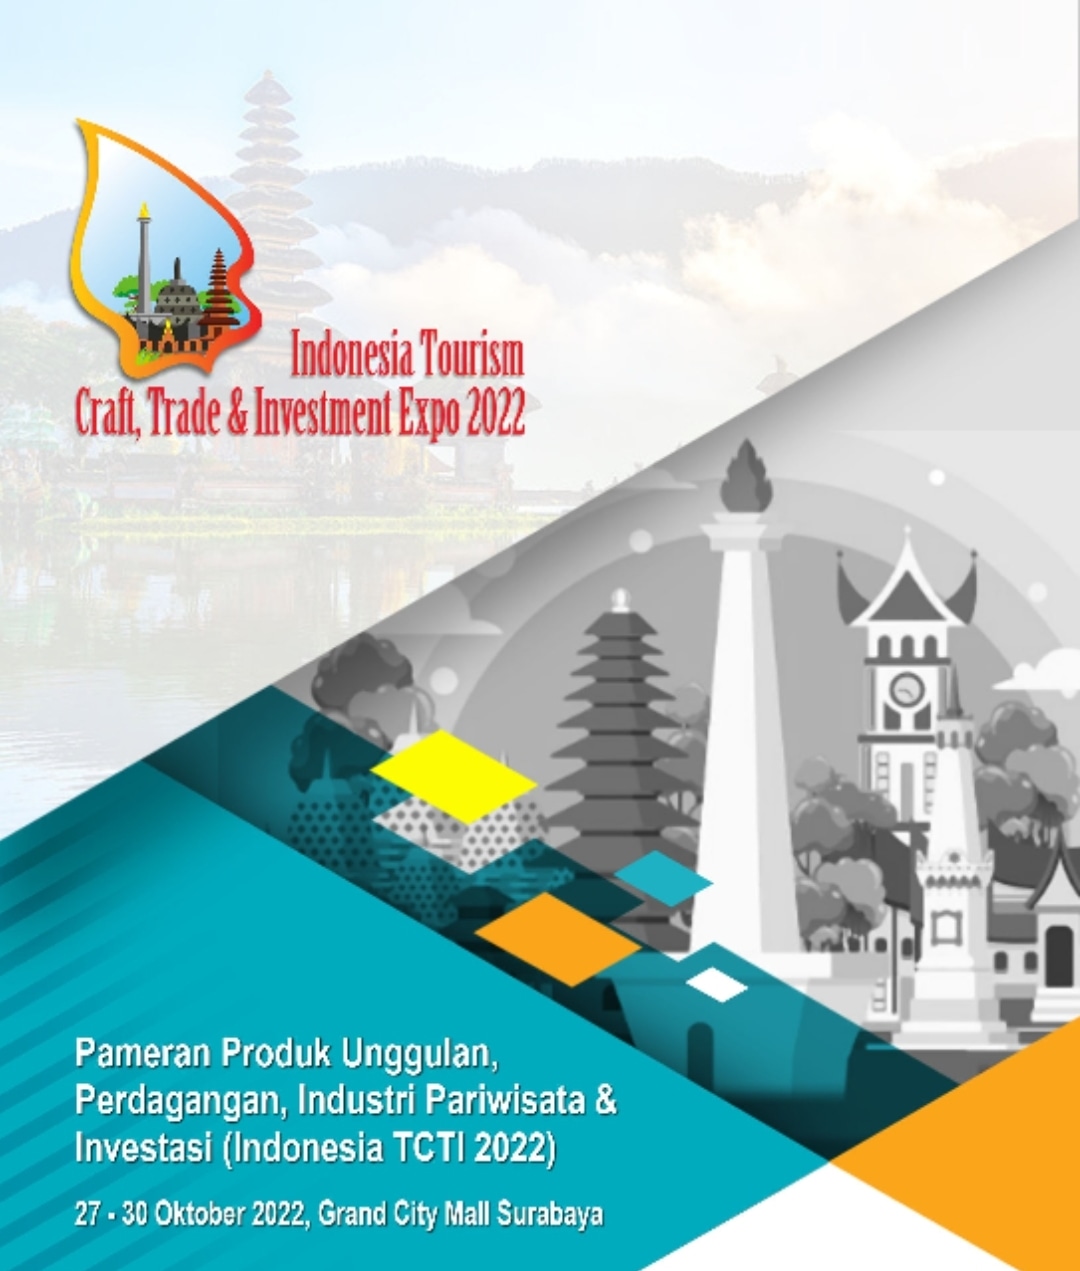 INDONESIA TOURISM, CRAFT, TRADE & INVESTMENT EXPO 2022